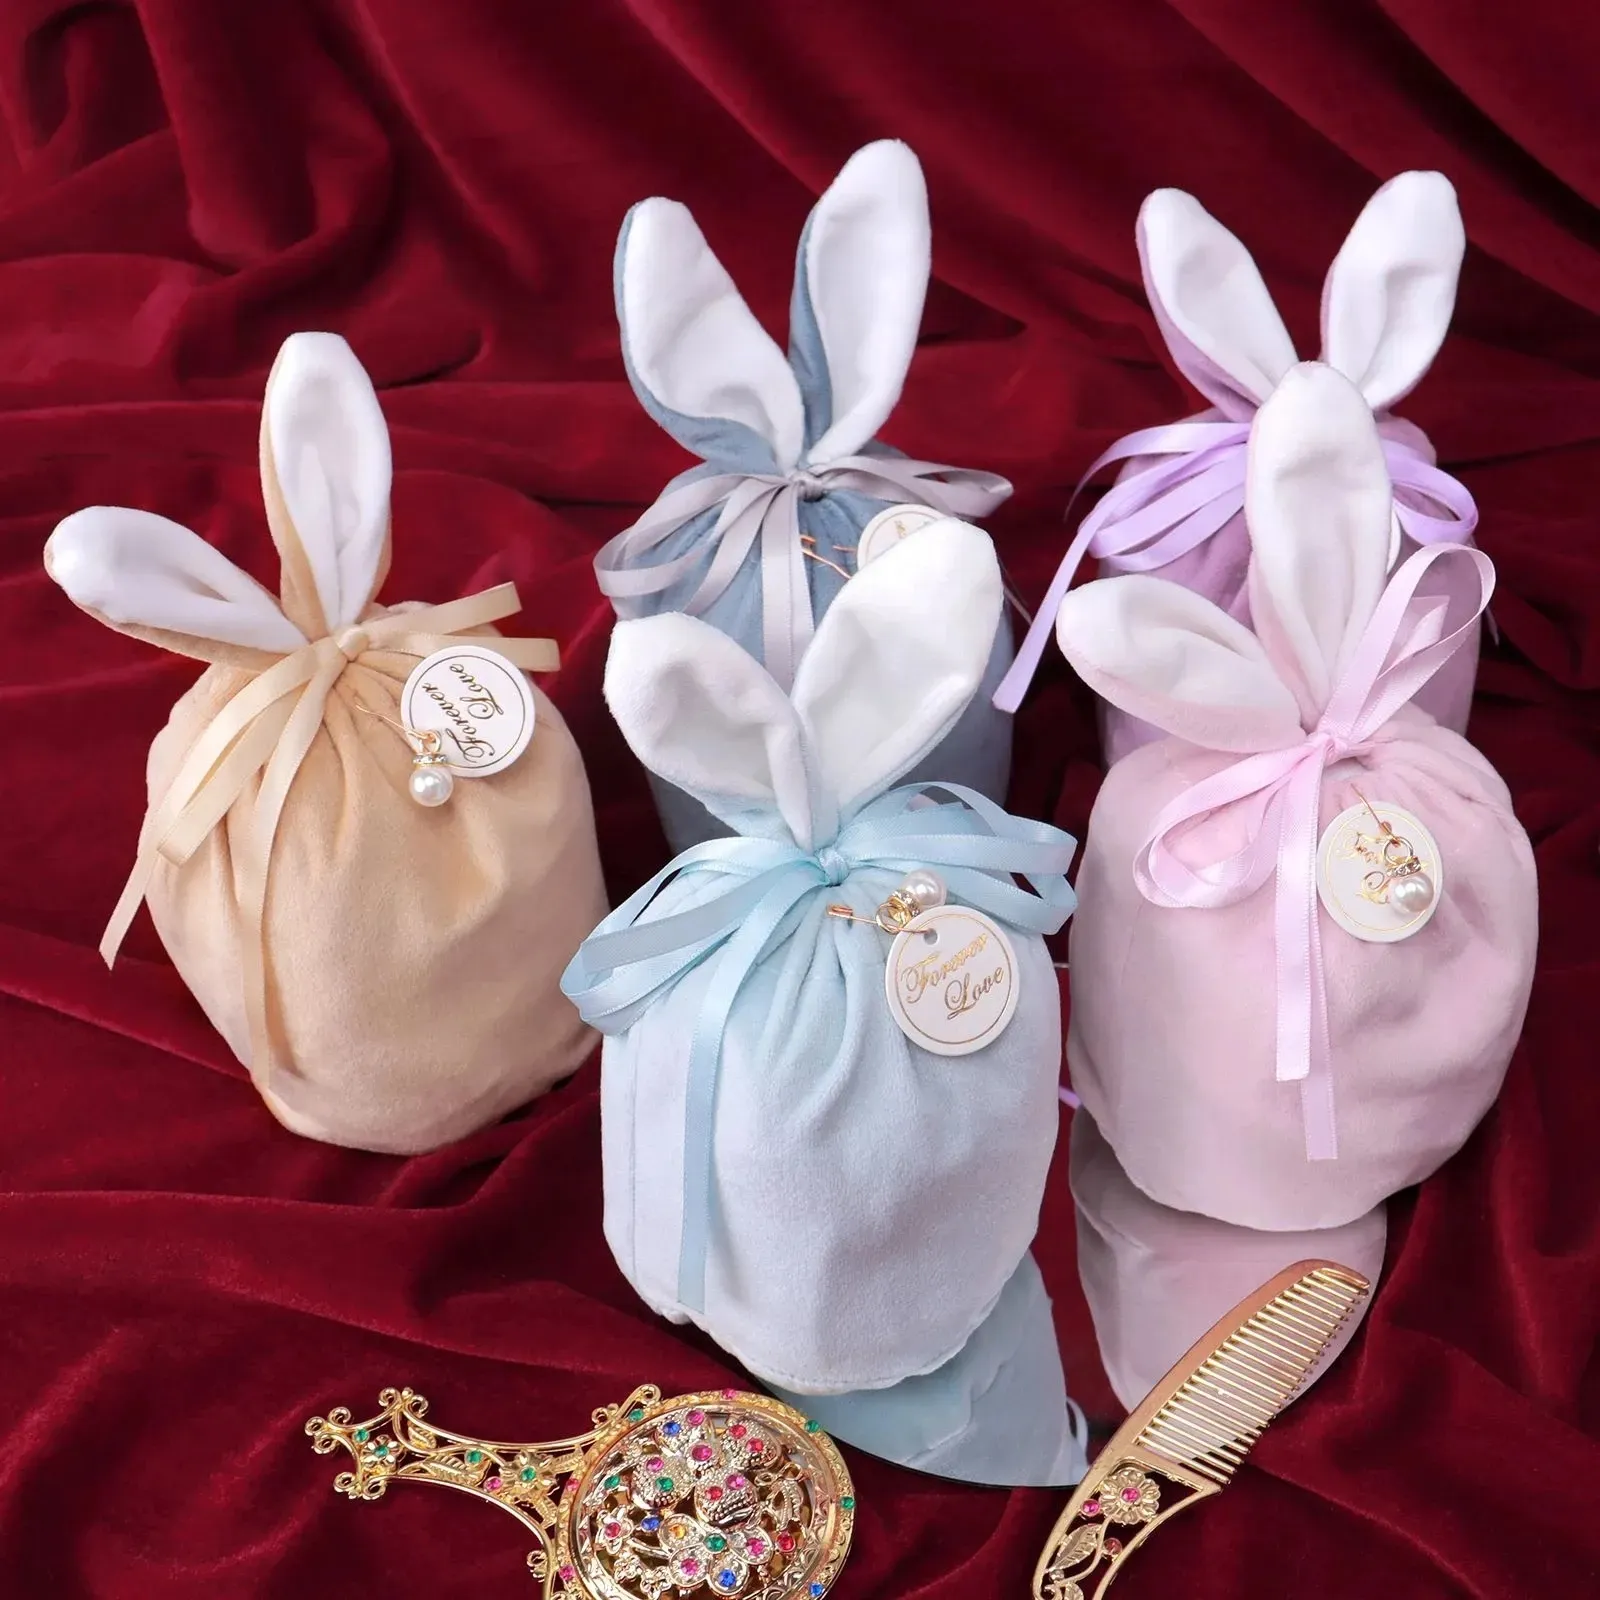 Bunny Ear Velvet Drawstring Bags Rabbit Ears Chocolate Candy Bags with Pearl Easter Gift Bags Pouches Wedding Party Decor